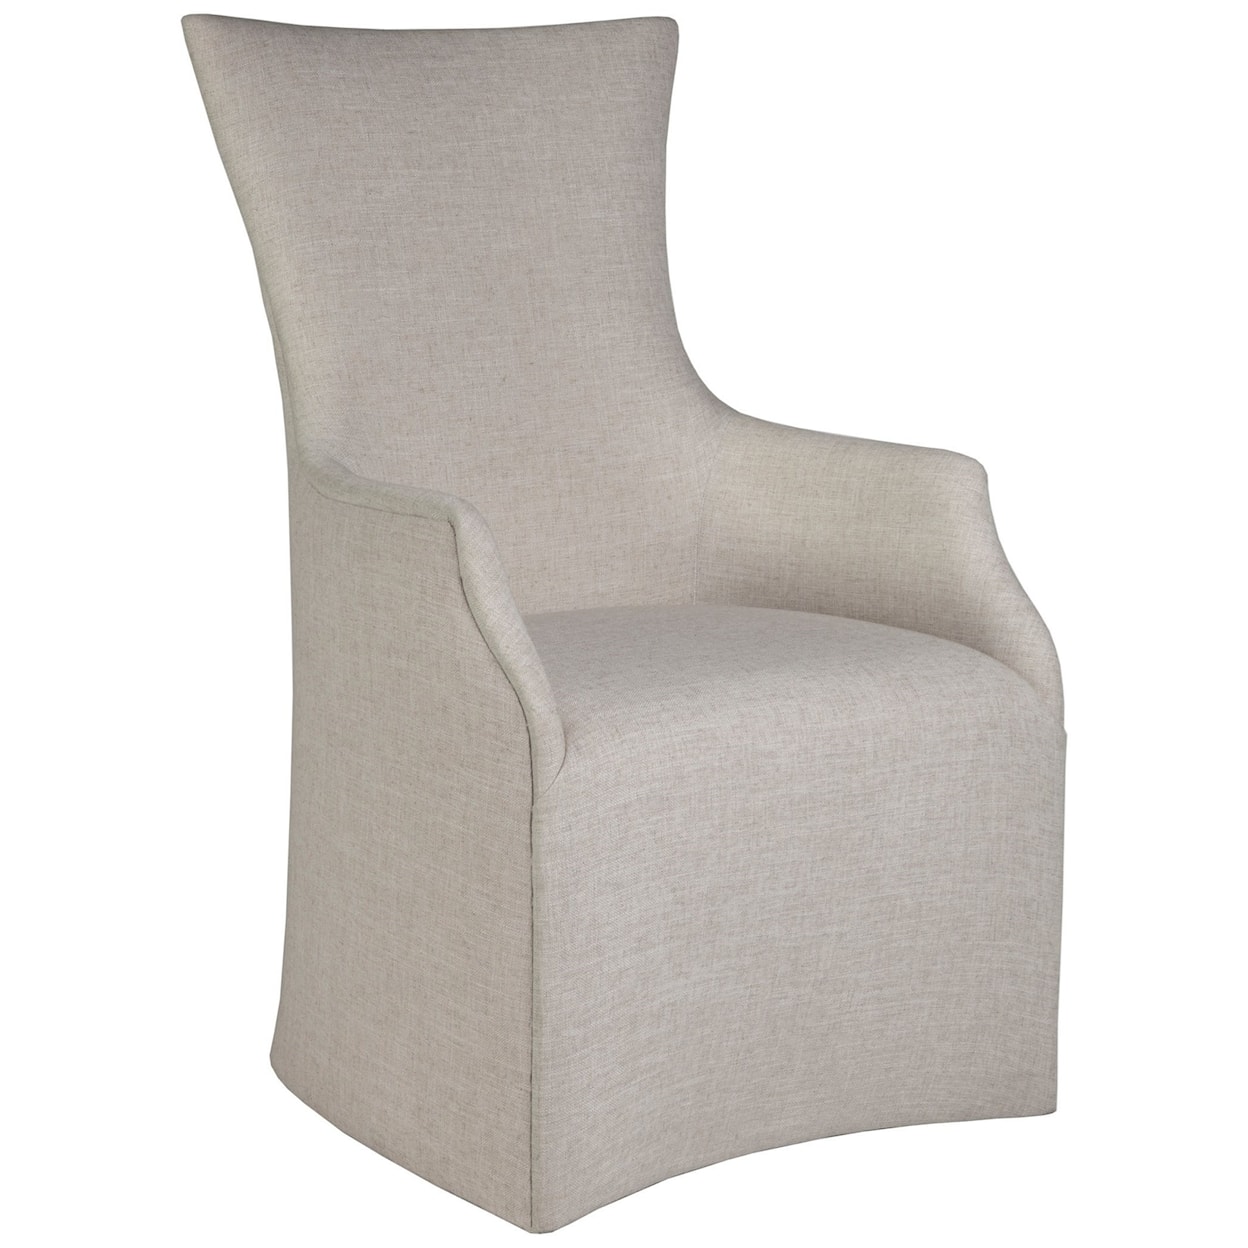 Artistica Juliet Arm Chair With Casters